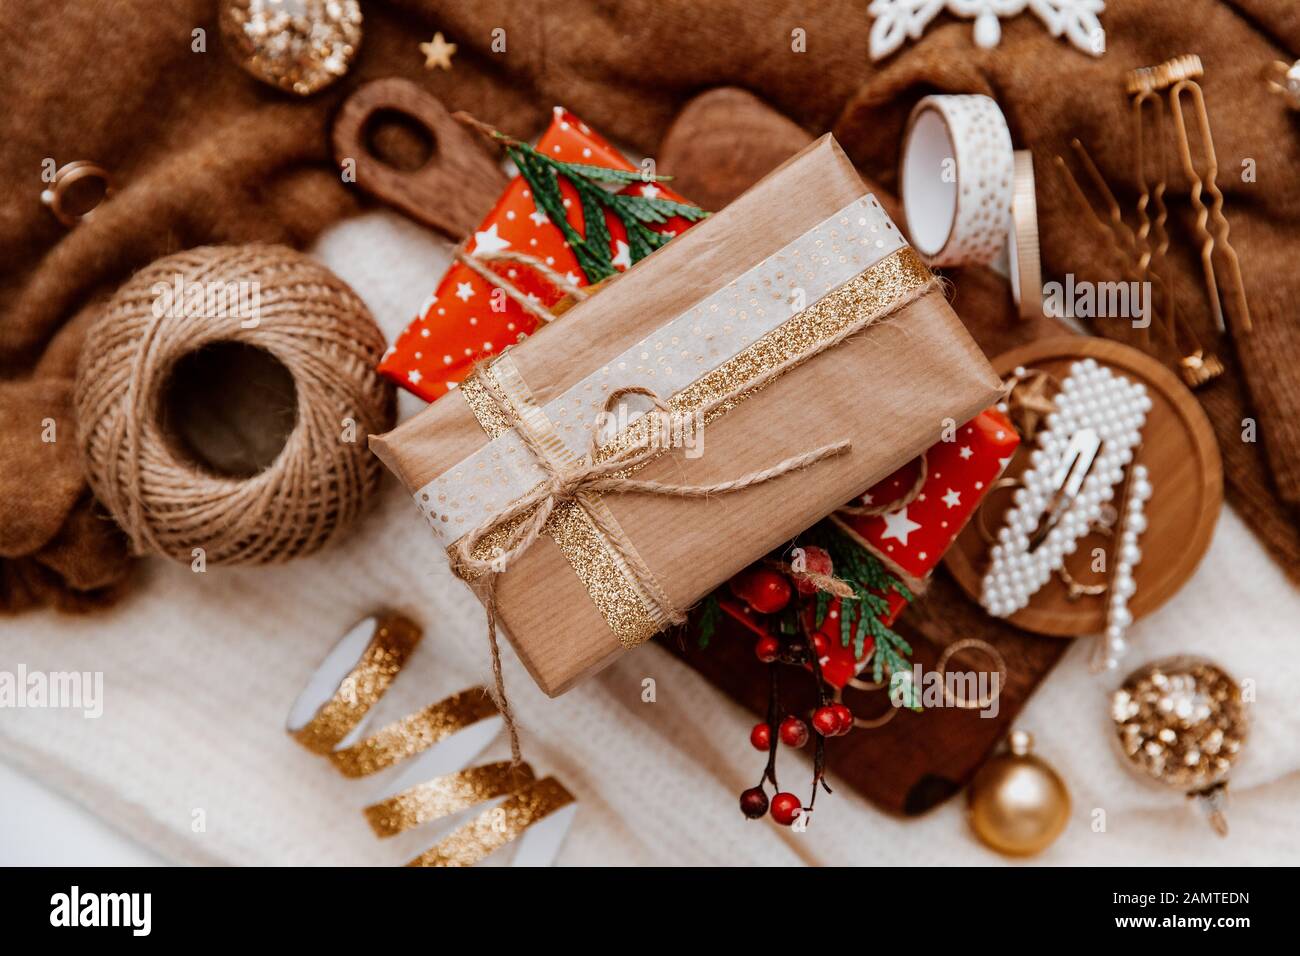 Wrapped Christmas decorations, string, ribbon and Christmas decor Stock Photo